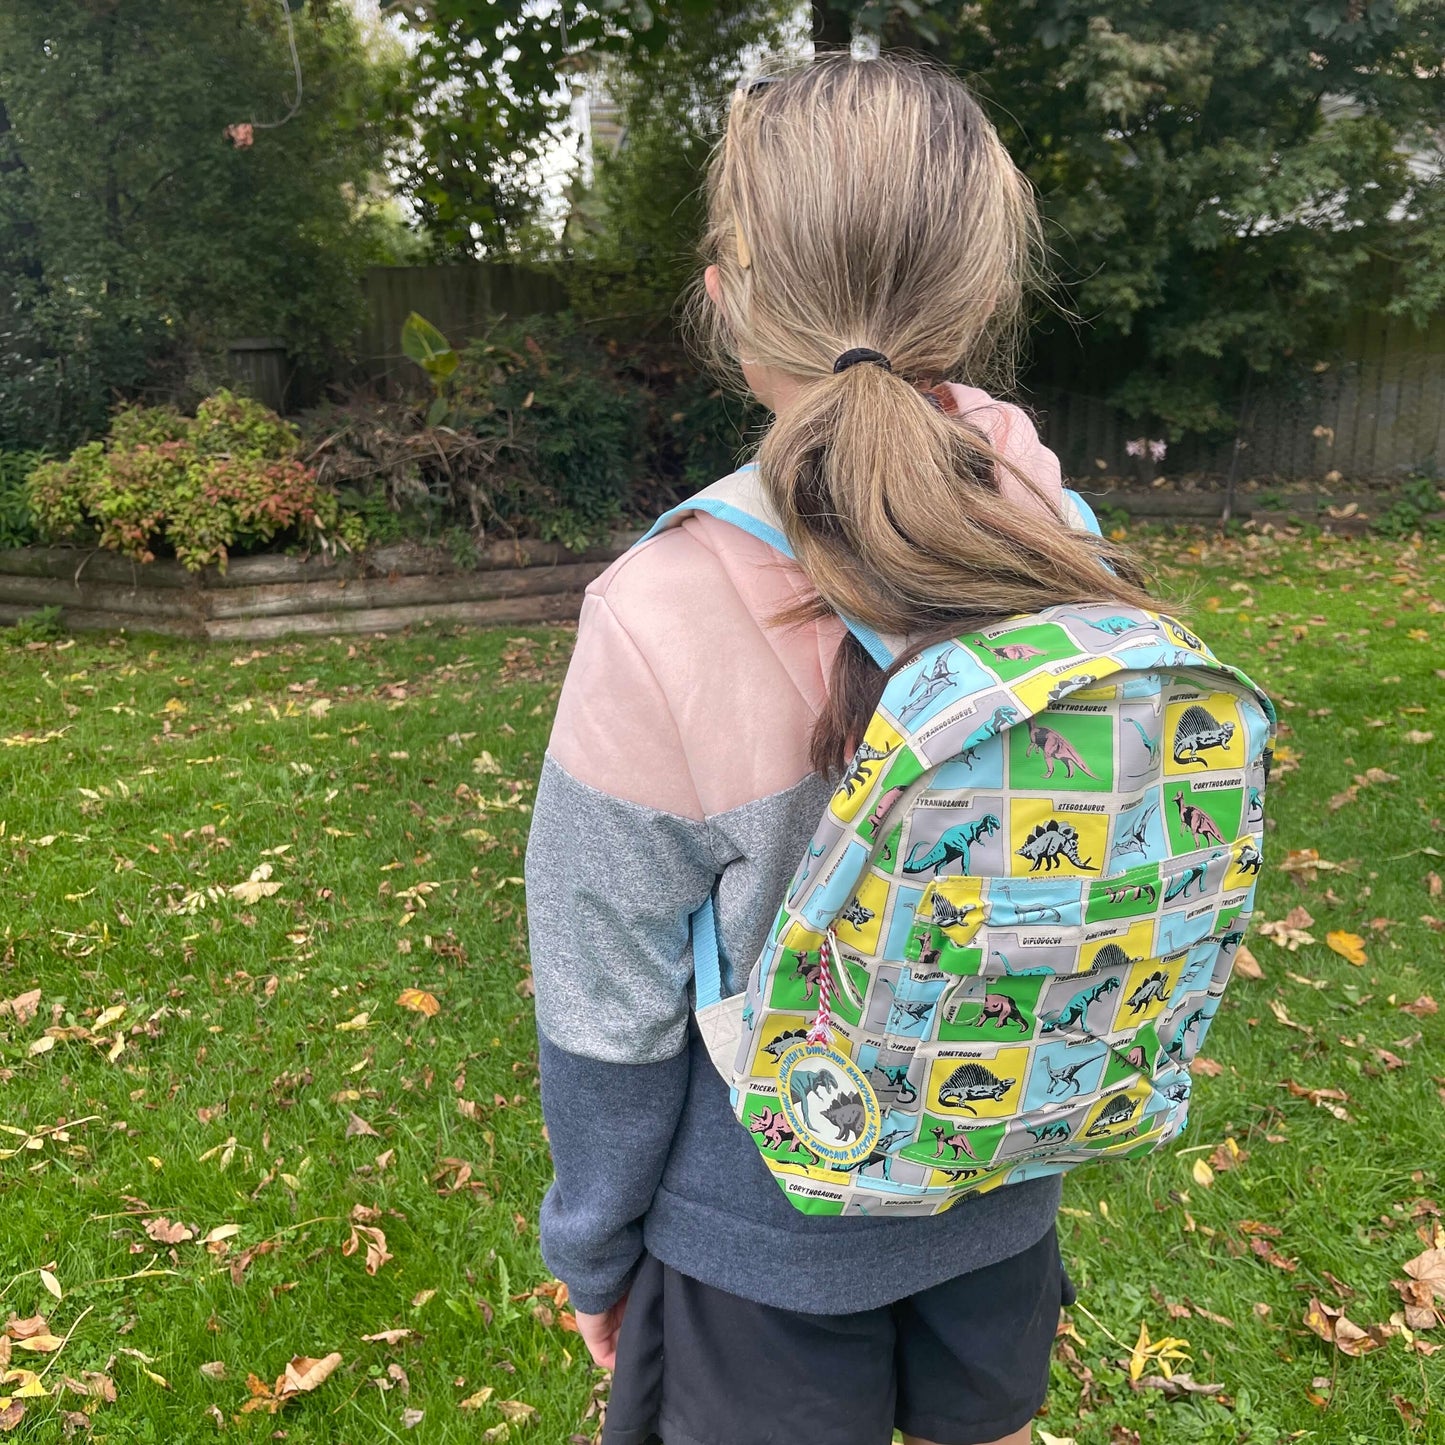 Girl wearing a backpack with dinosaurs printed on it in grey, blue, green & yellow squares.